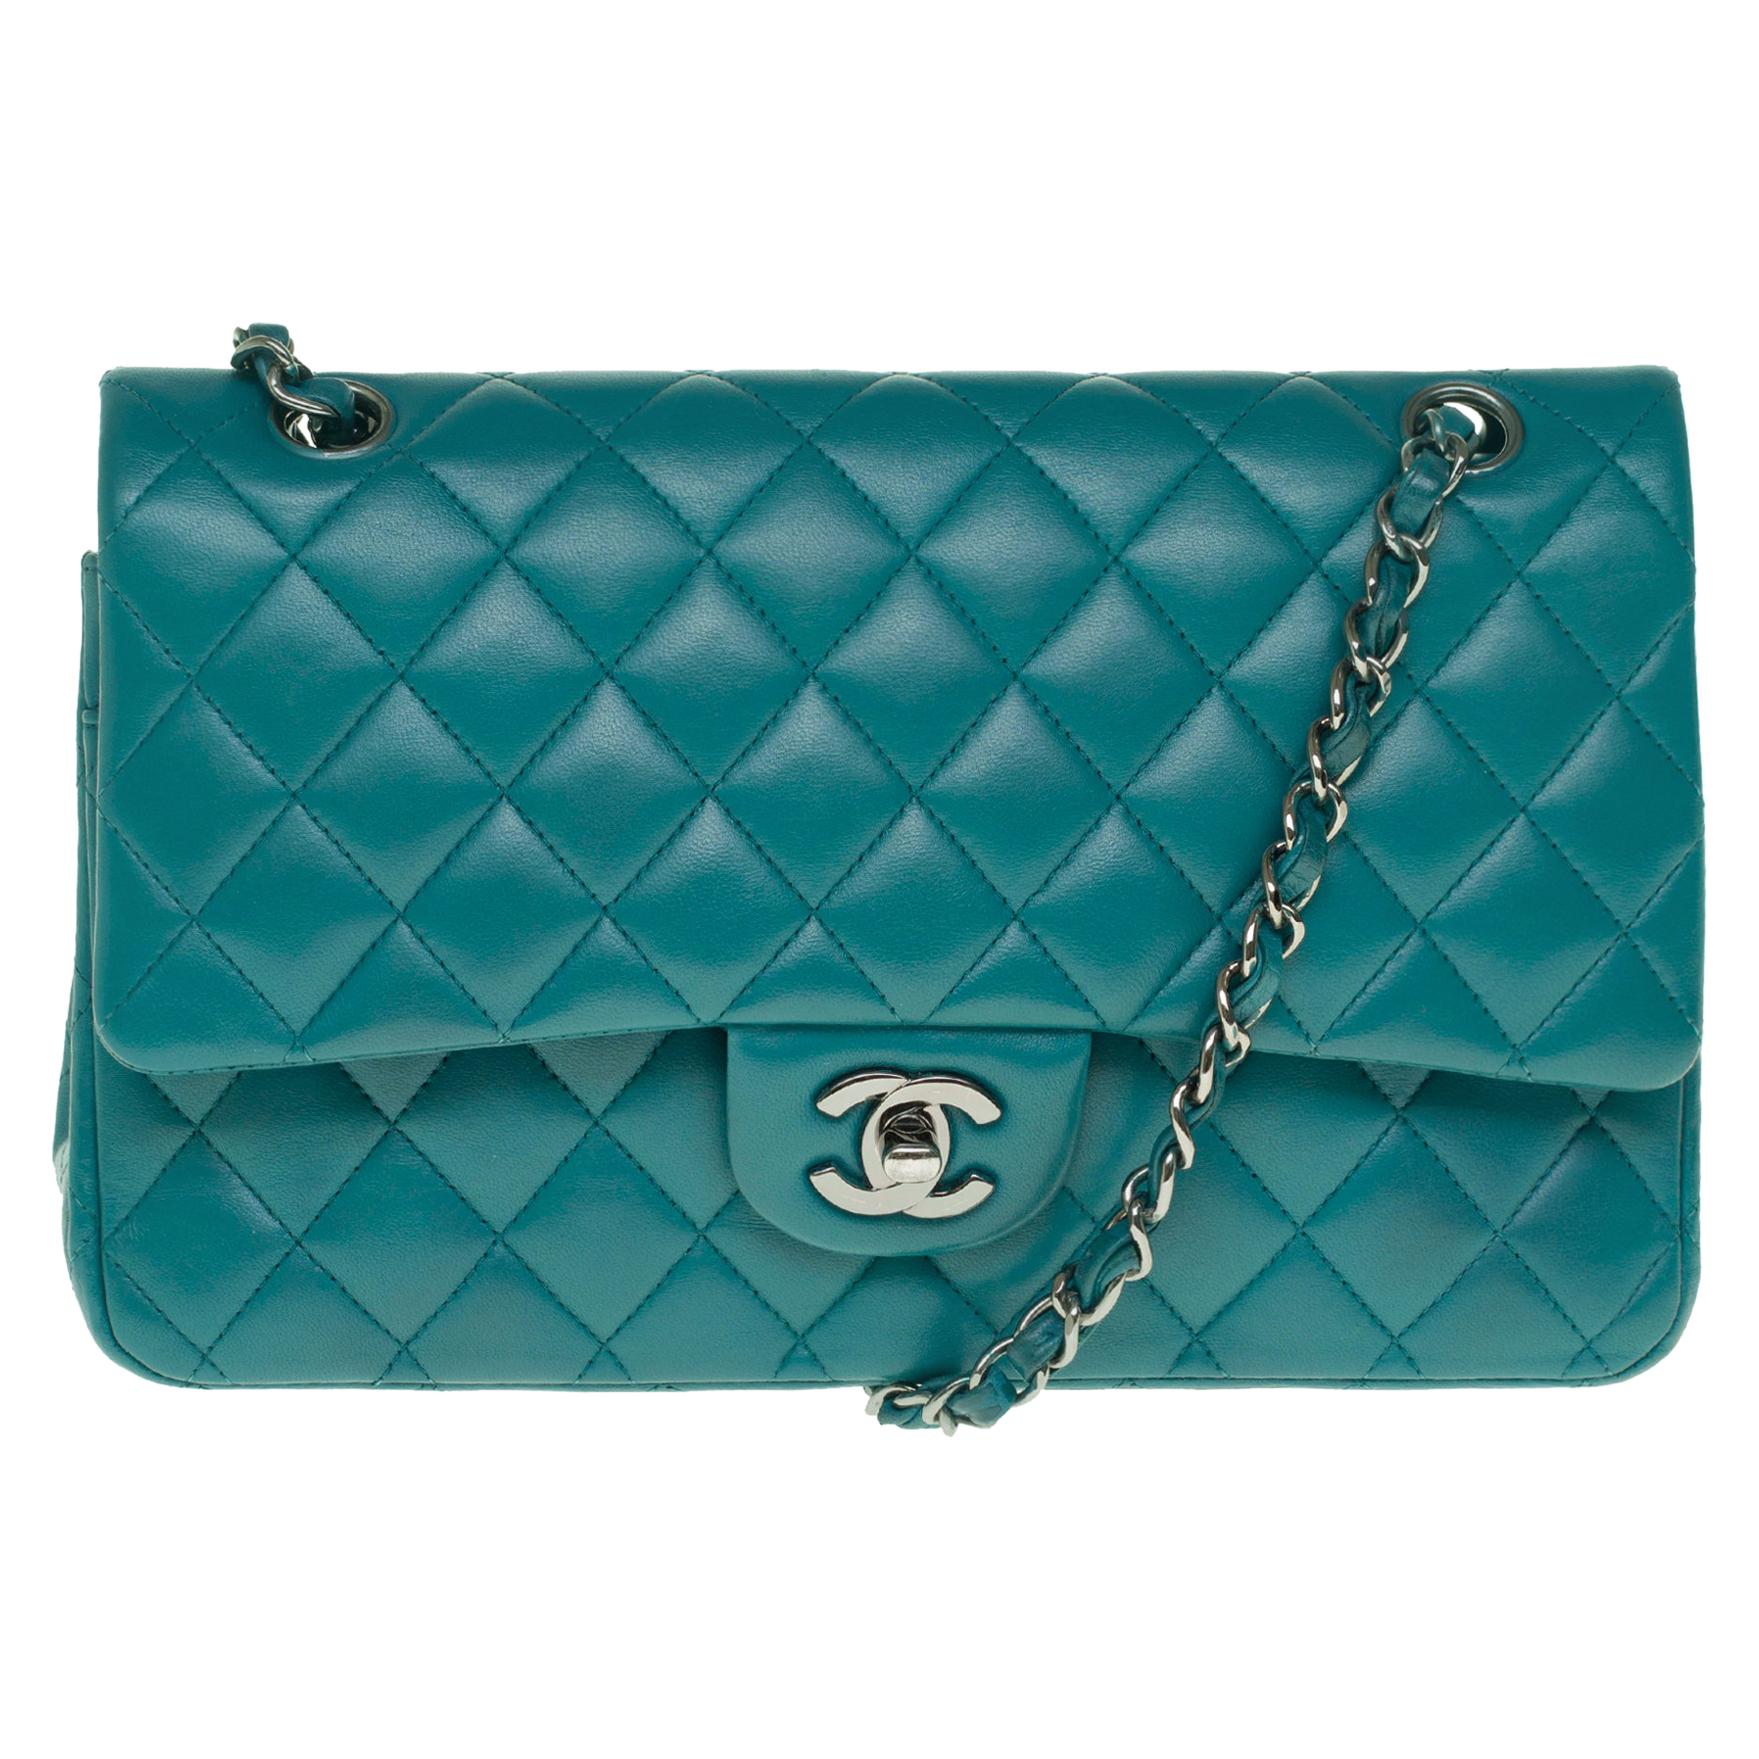 Amazing Chanel 2.55 handbag in green quilted lamb leather, Silver hardware